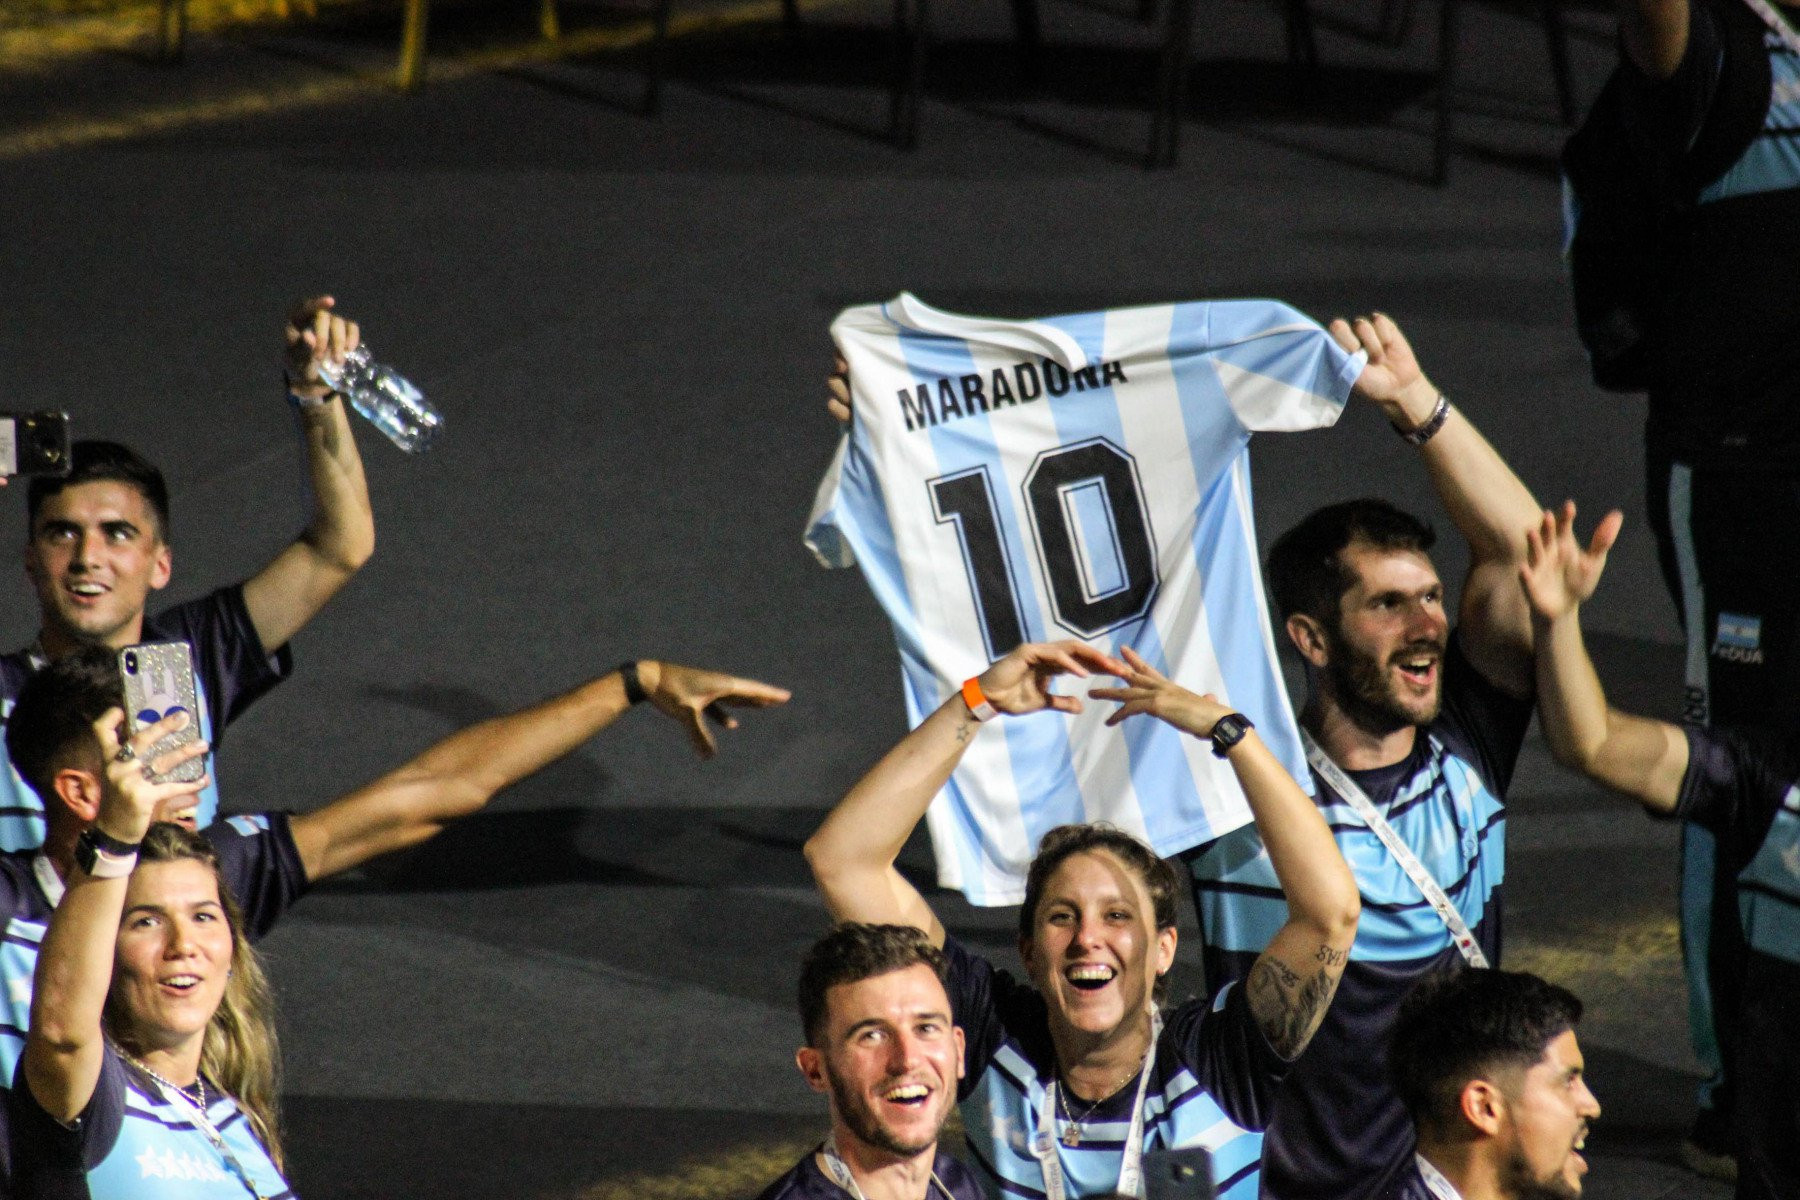 The team from Argentina waved a Maradona jersey and earned a huge reception during the Opening Ceremony of the Summer Universiade in Naples on Wednesday ©Naples 2019 